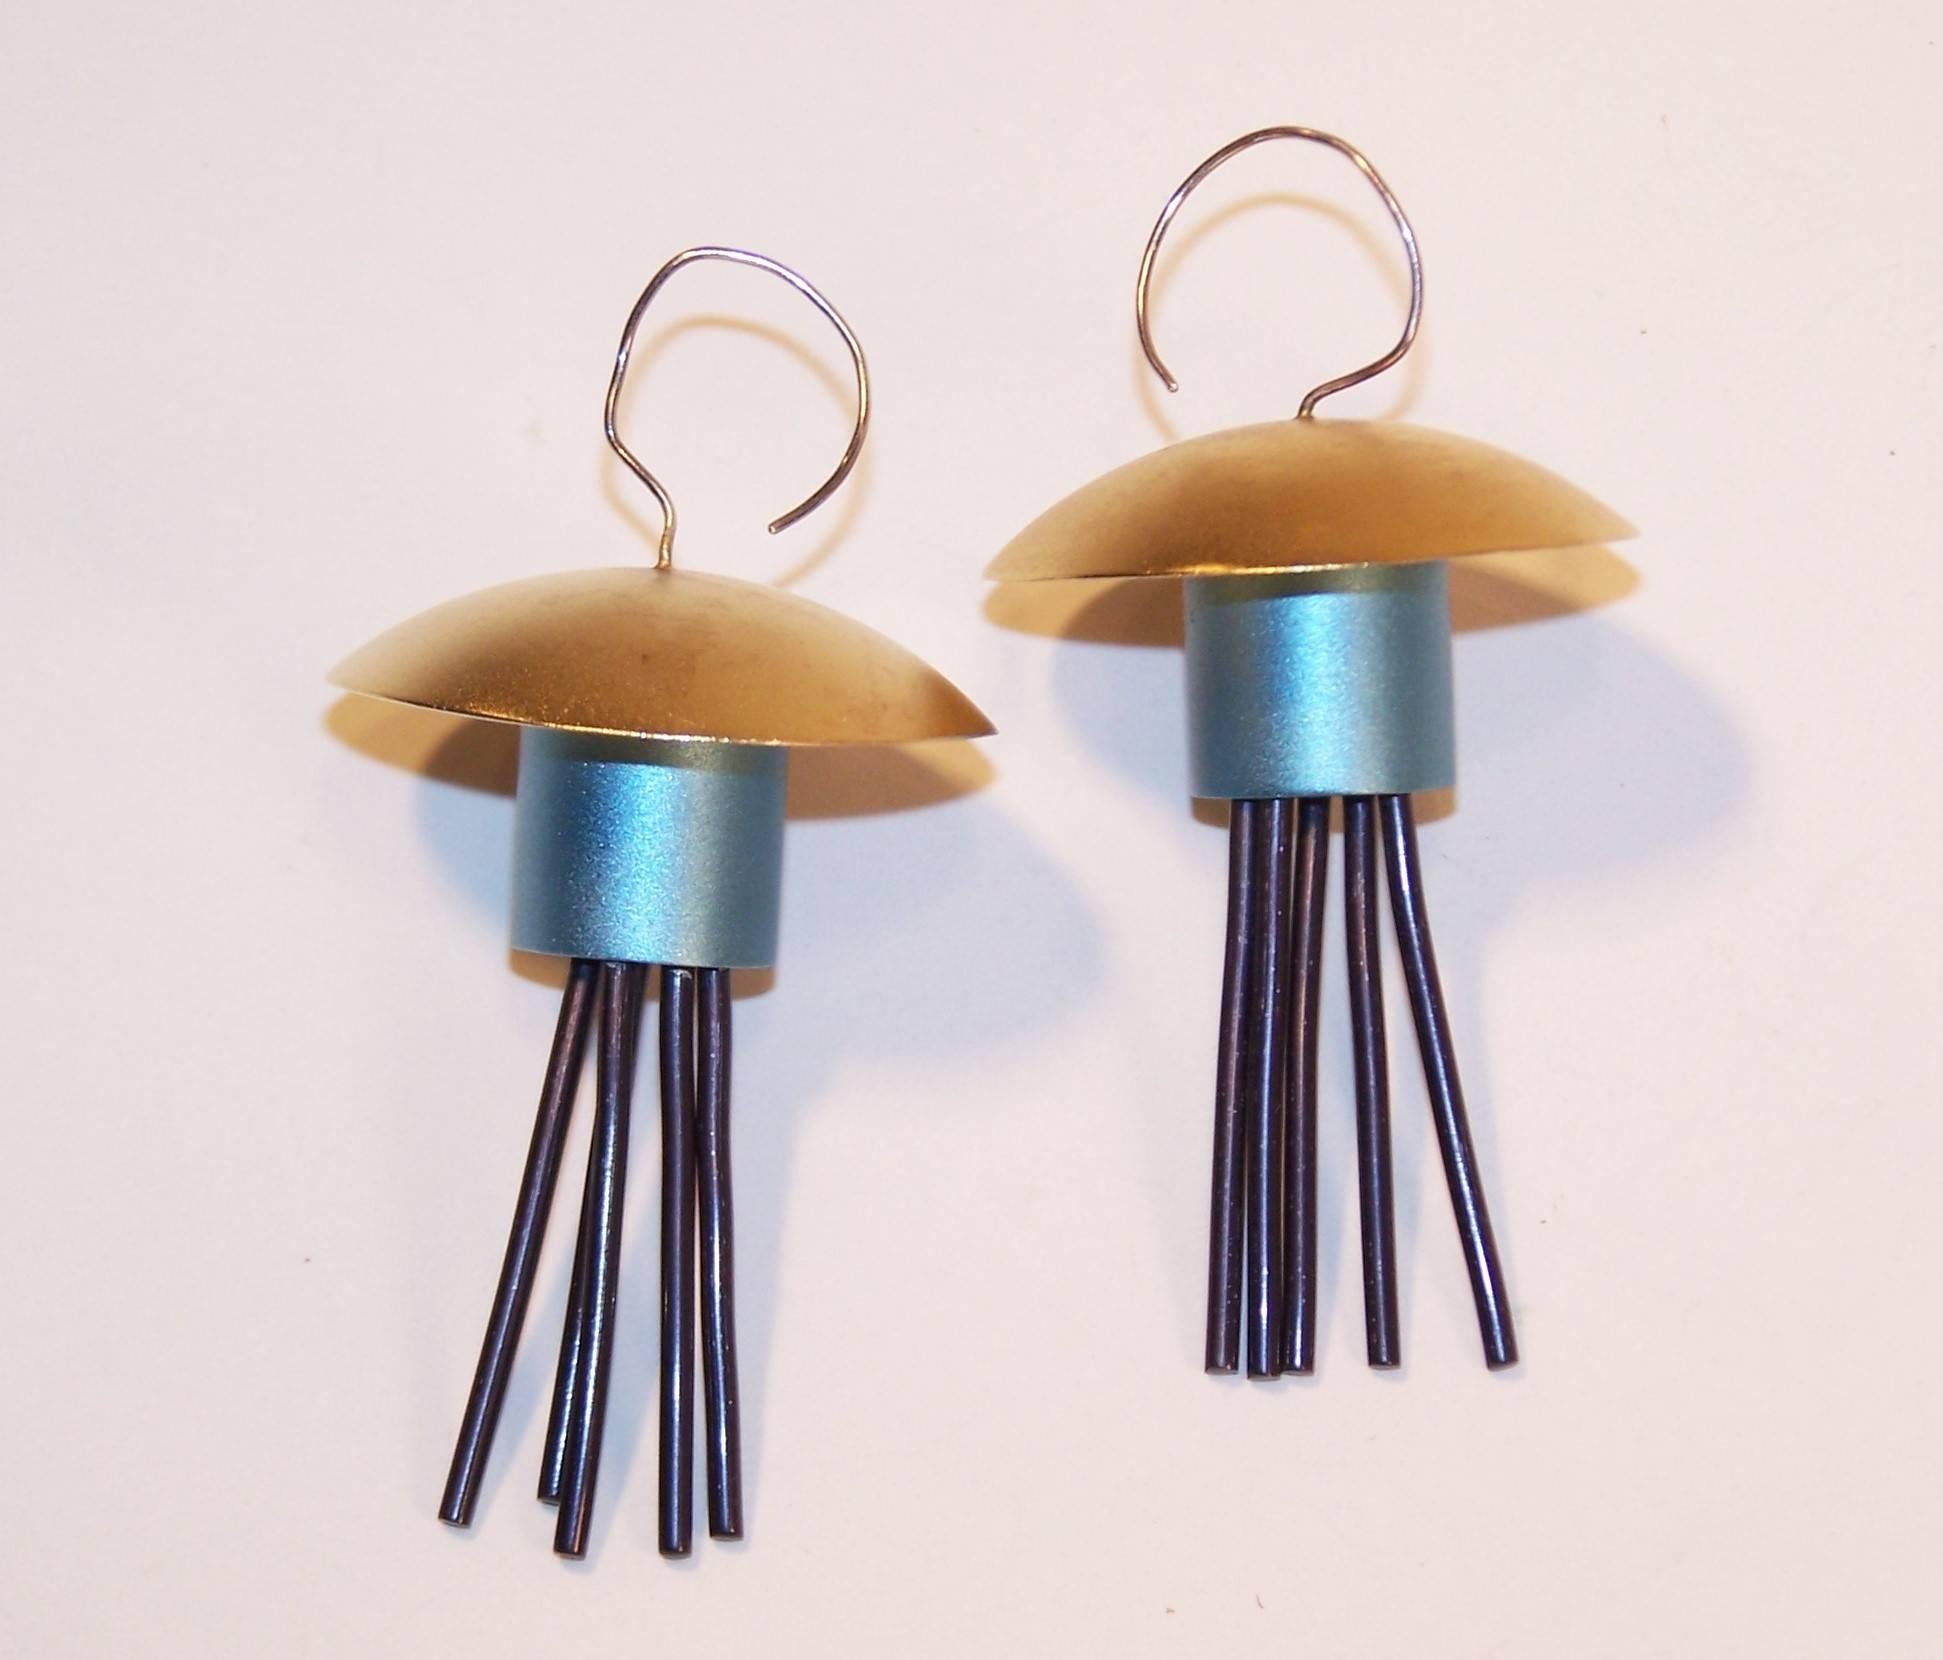 The wit and whimsy of the Memphis design movement is apparent in these charming earrings.  The anodized aluminum gold and frosty aqua blue bases suspend articulated black rods creating both movement and a sculptural style. Whether you see pagodas,